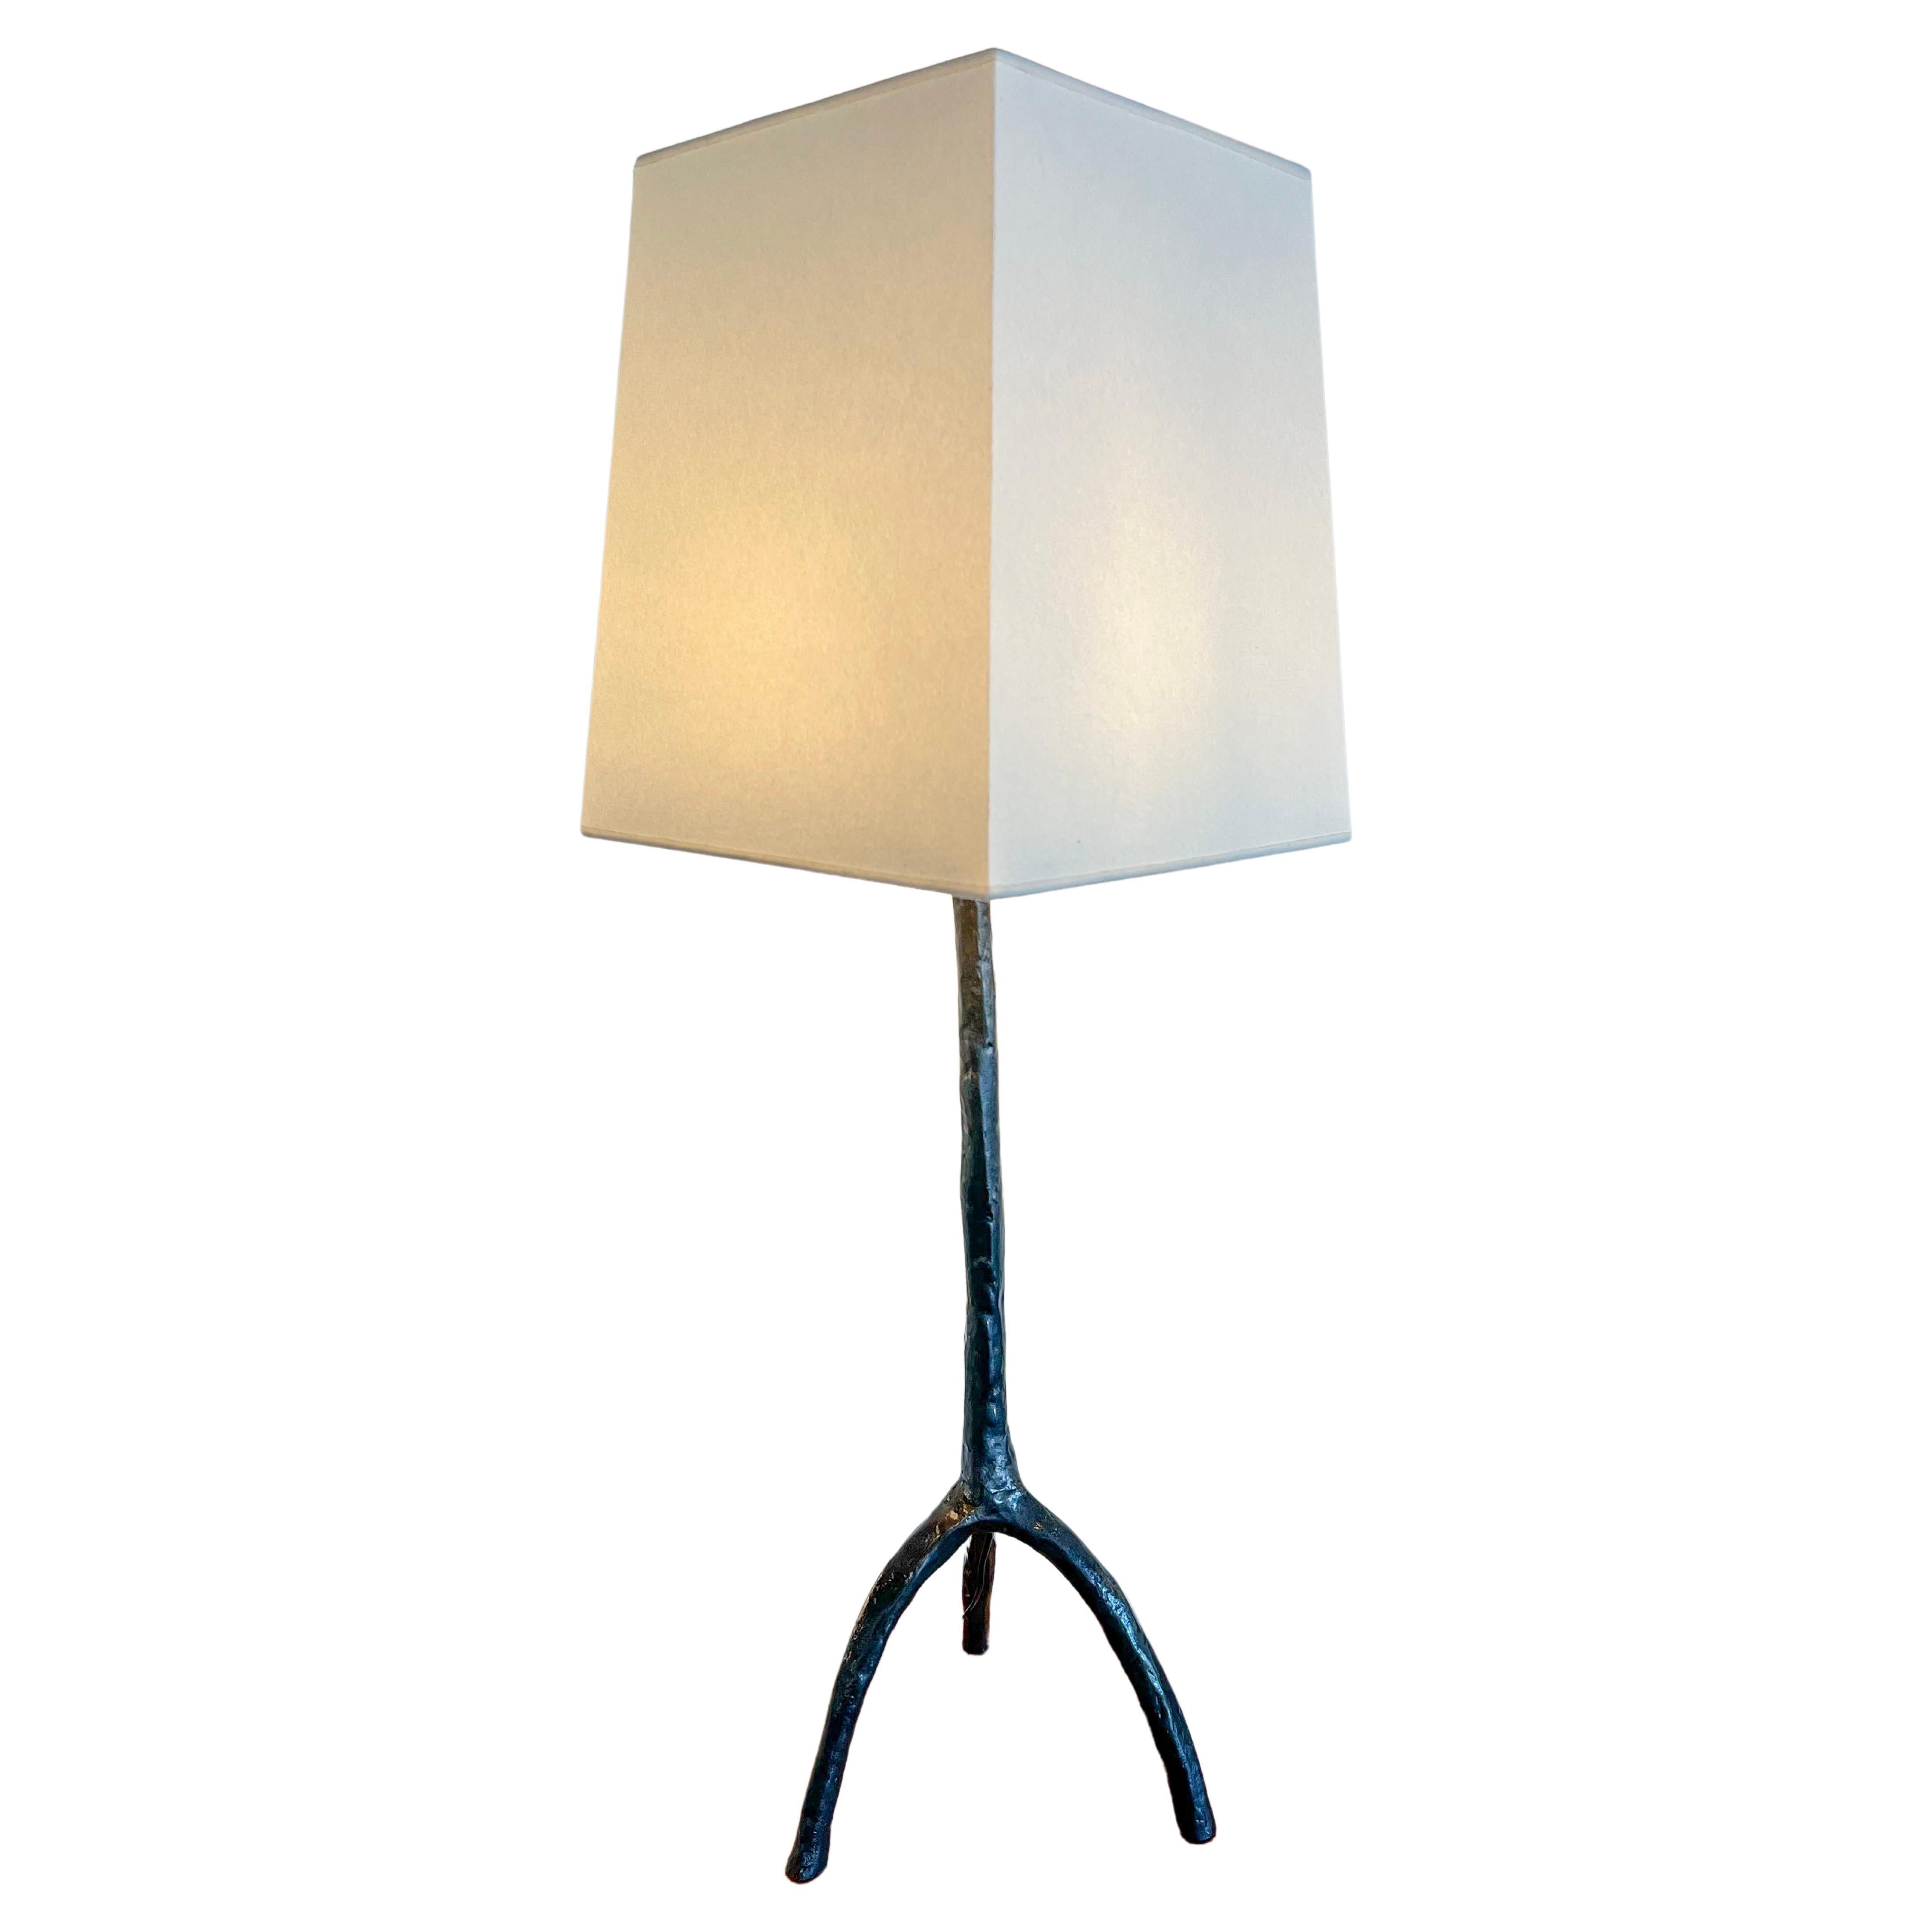 Christian Liaigre "Trepied" Bronze Desk Lamp - 2 Available